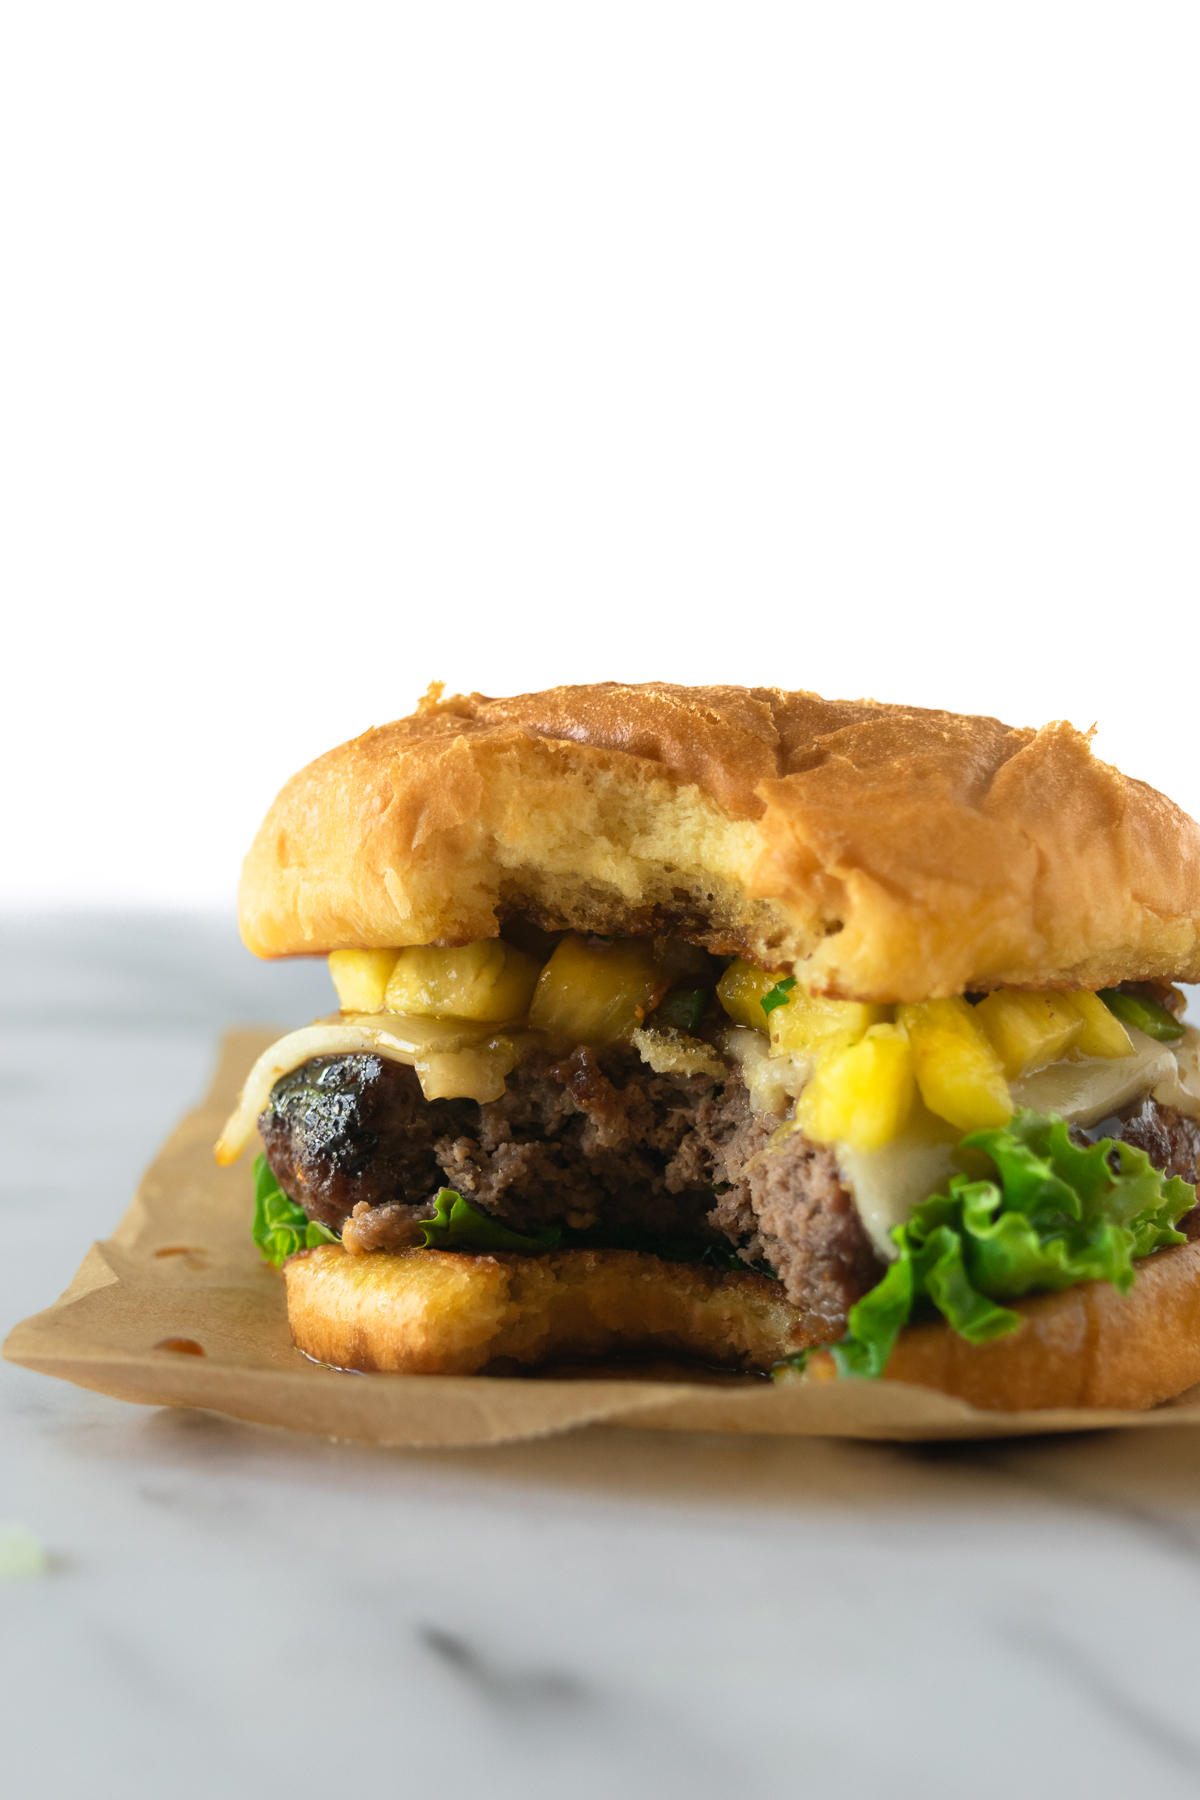 a bite from a teriyaki burger with melted cheese, lettuce, and pineapple salsa.